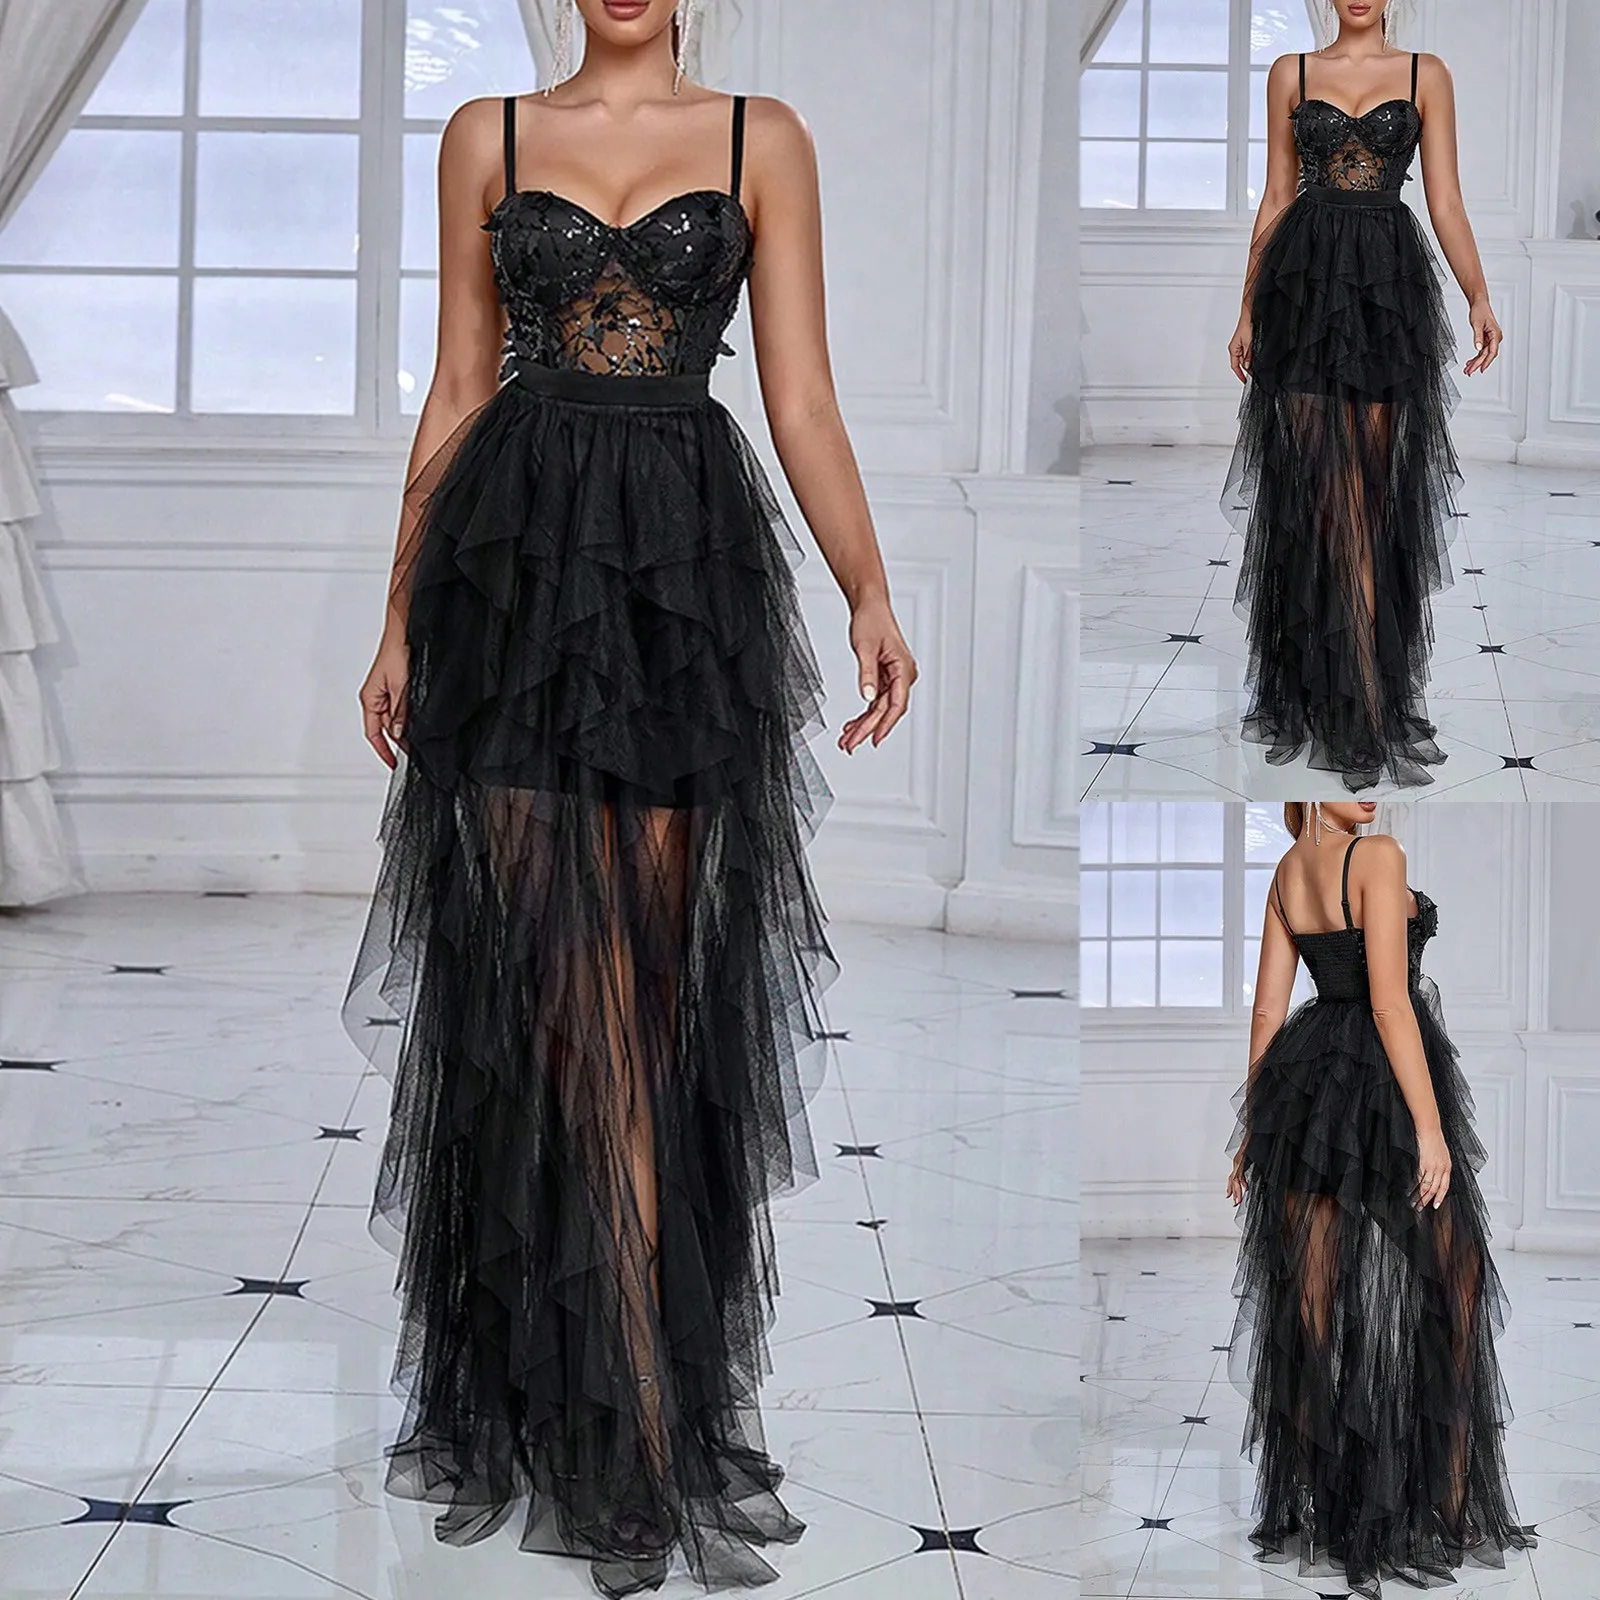 Sequin Patchwork Mesh Evening Dress New Women'S Sexy Fashionable Sling Long Dress With Butterfly Woman Clothing Women'S Dress